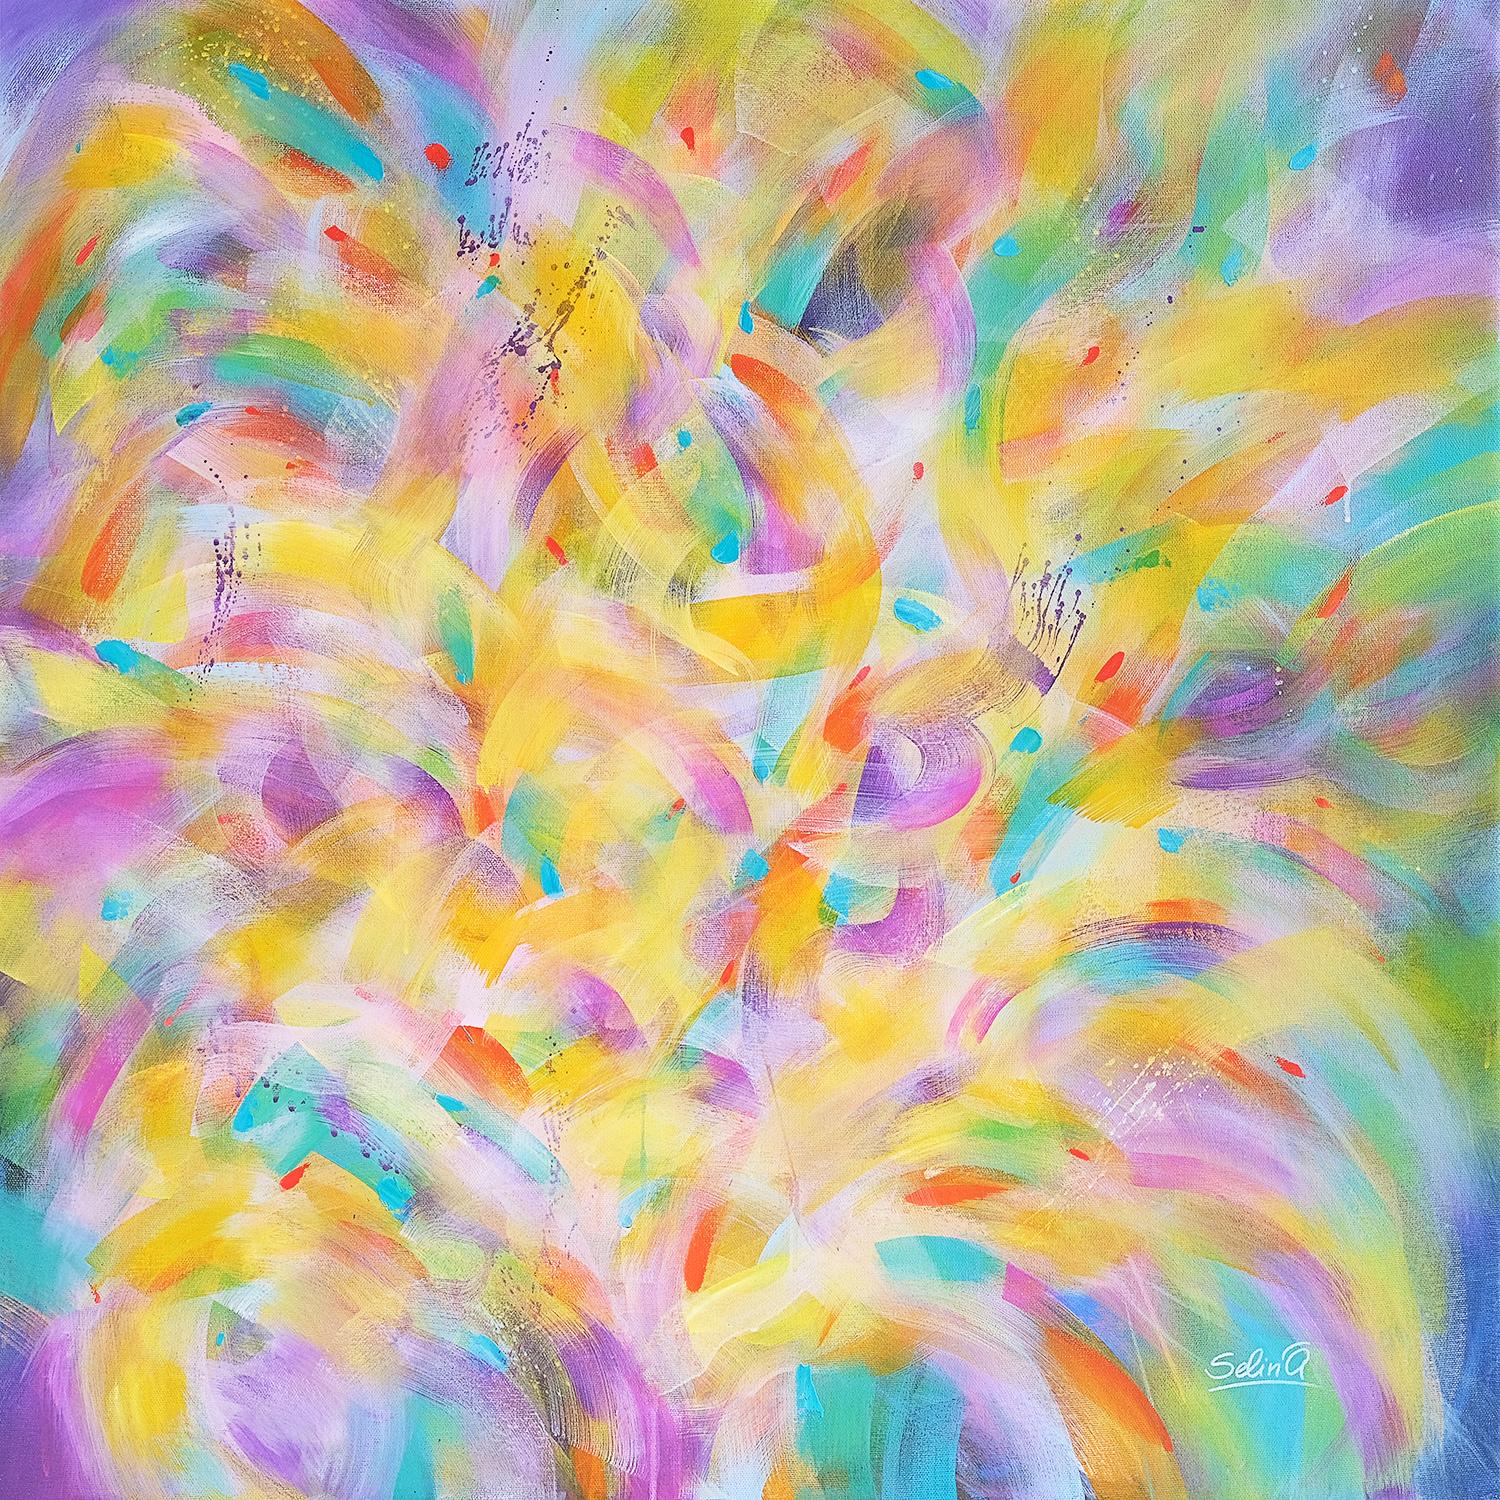 Spring light, Modern Colorful Abstract Painting 100x100cm by Anna Selina